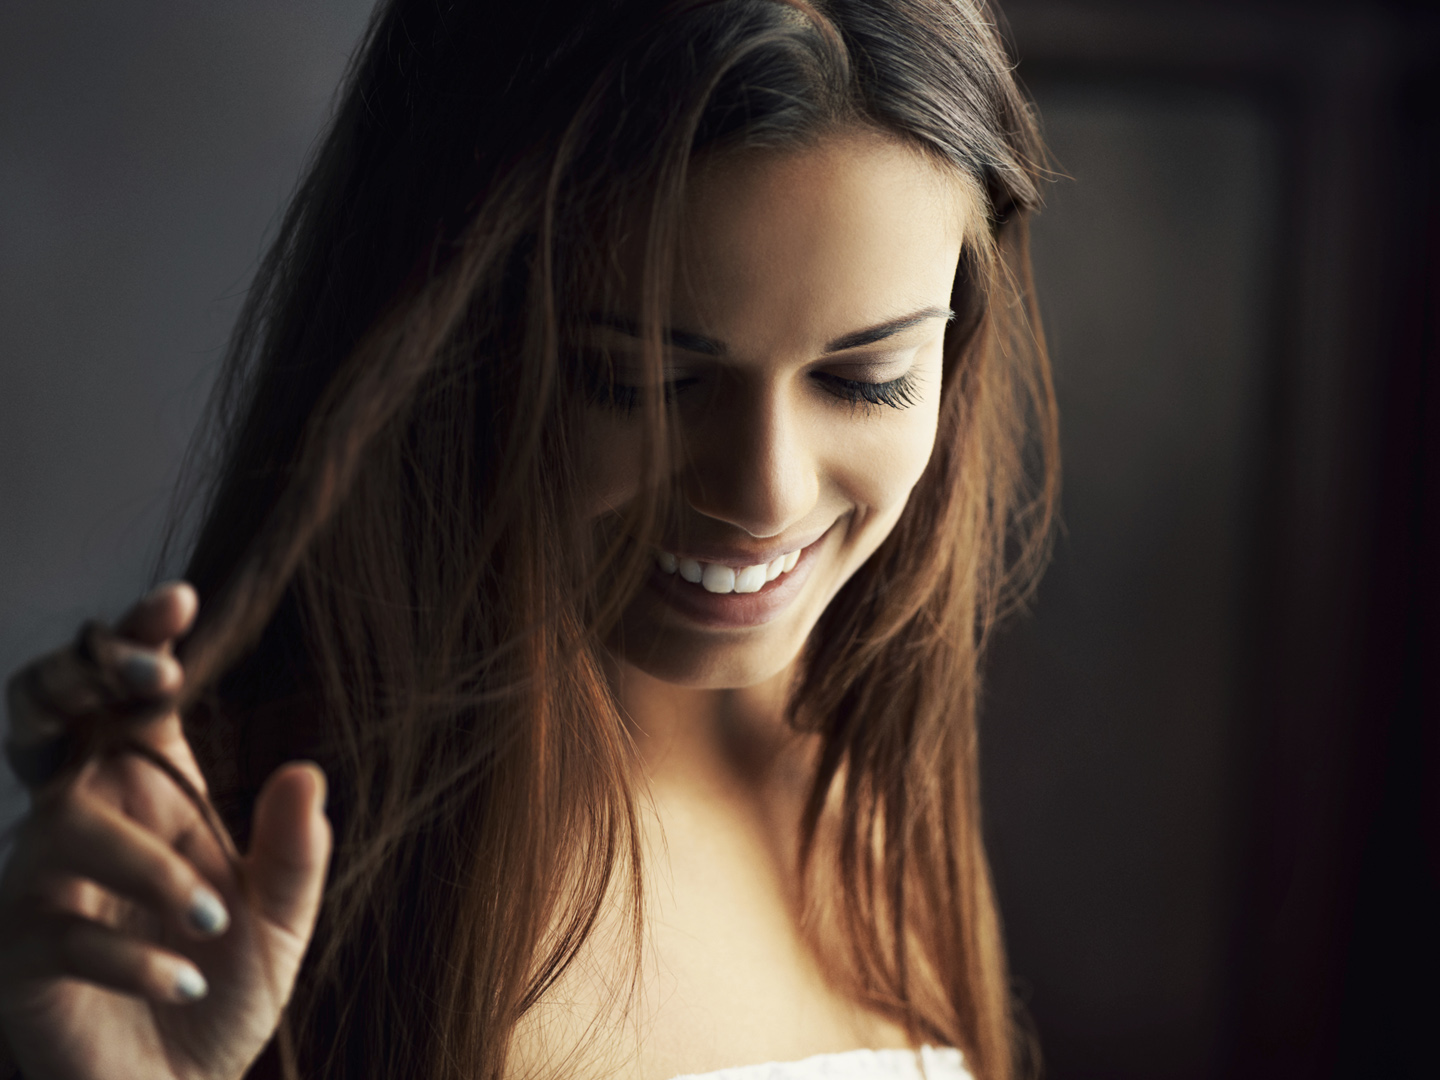 Candid shot of a sweet young woman smiling softly to herself